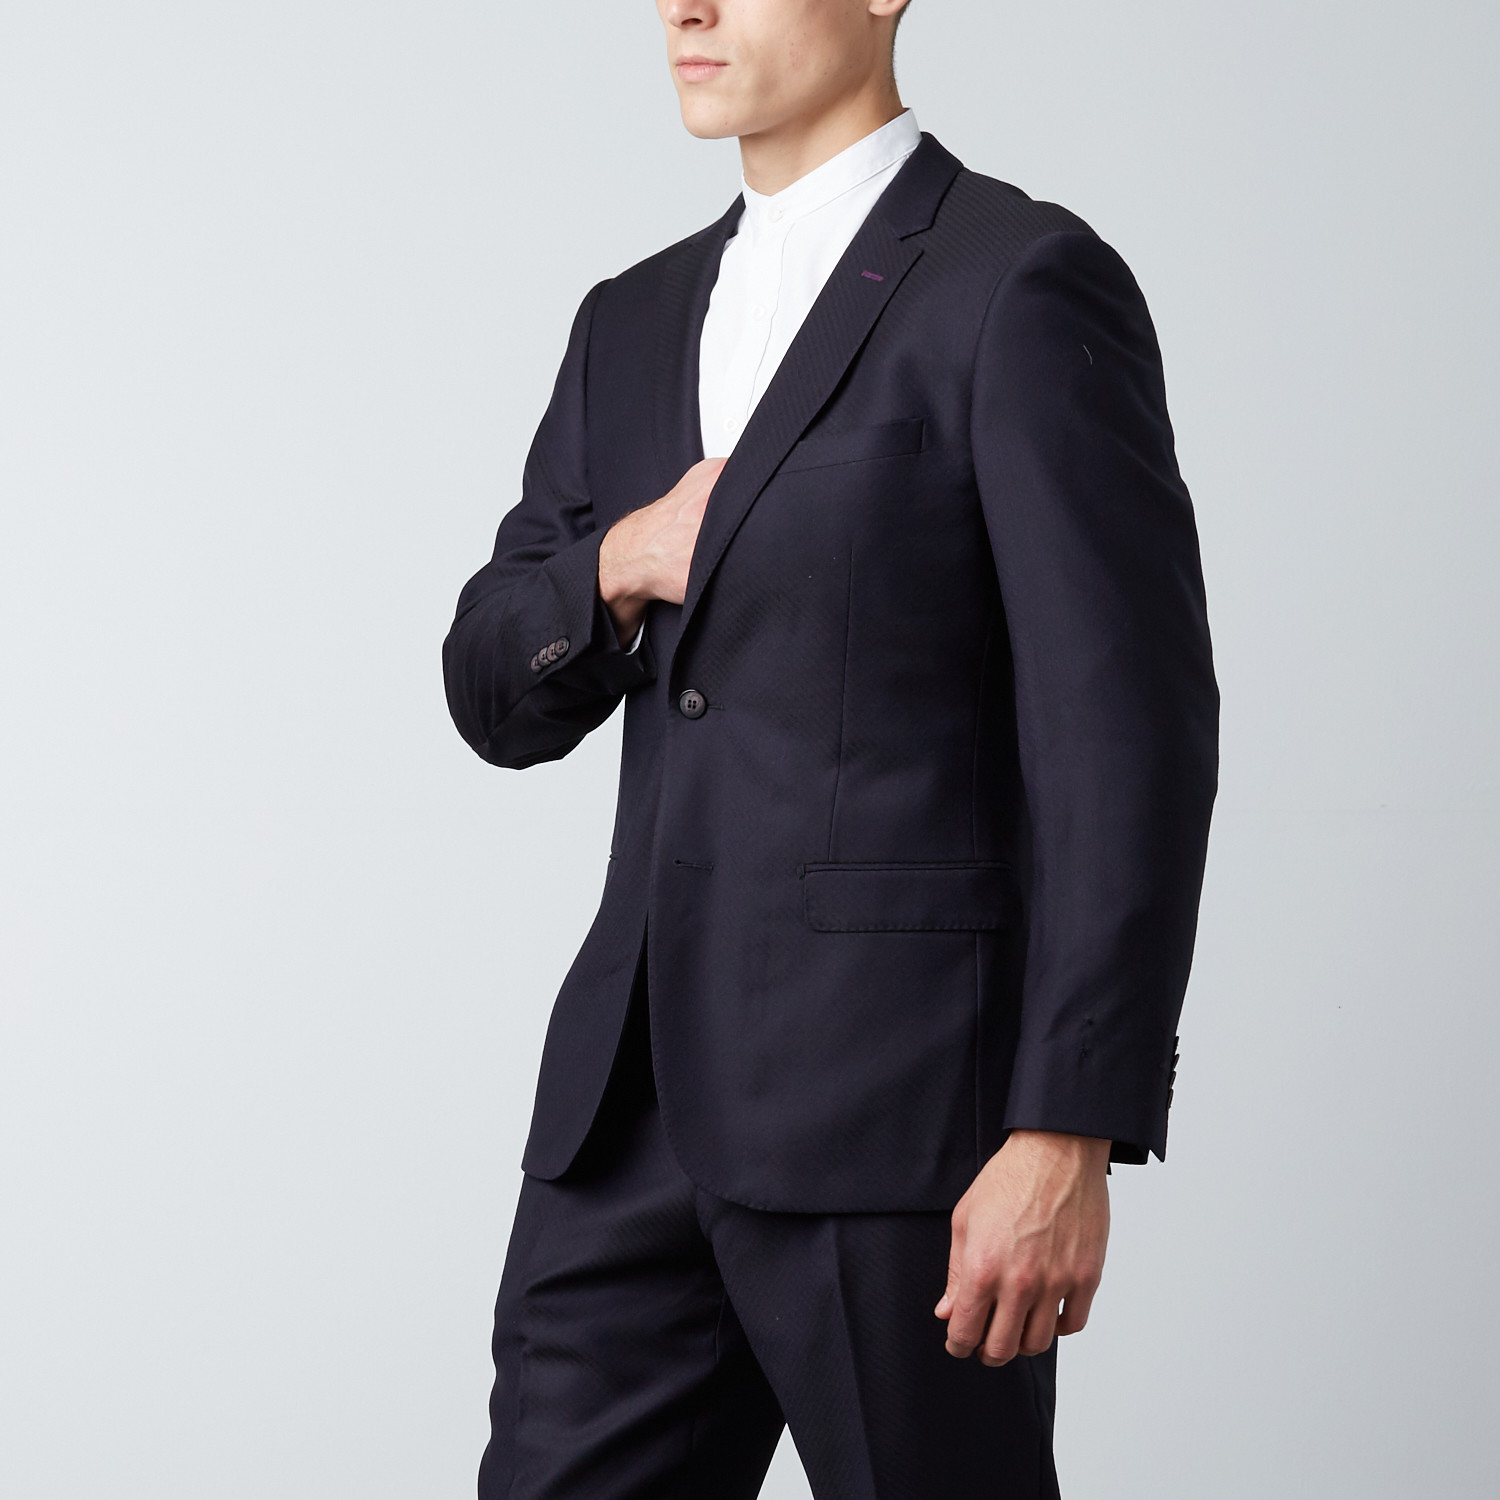 Slim Fit Suit // Shimmer Black (US: 40R) - SRG Fashion - Touch of Modern